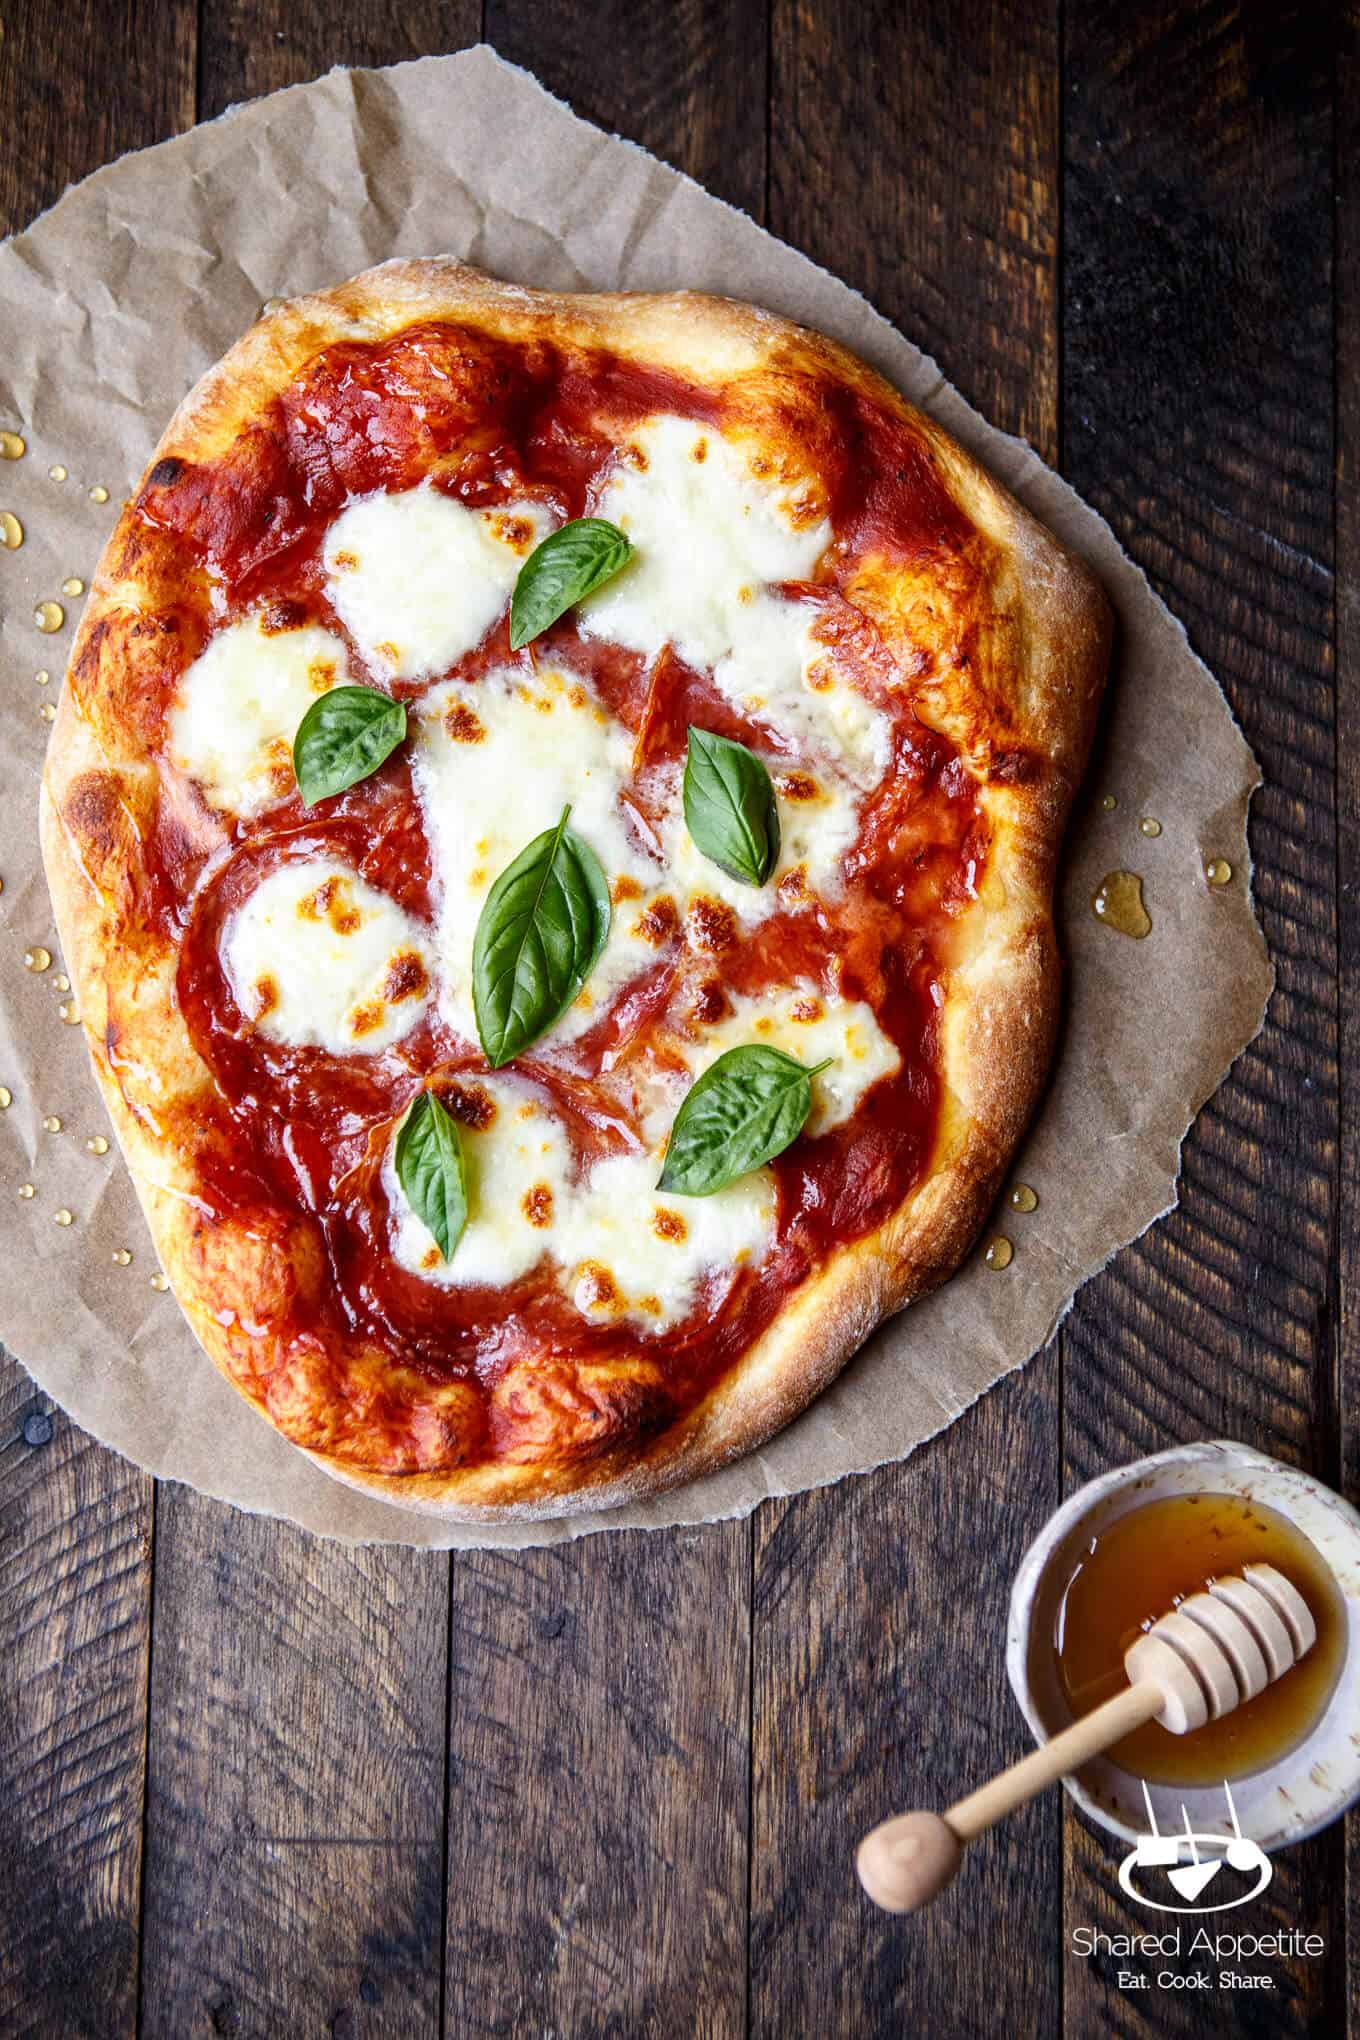 Spicy Honey Soppressata Pizza, also know as the Bee Sting Pizza after Roberta's Pizza in Brooklyn | sharedappetite.com